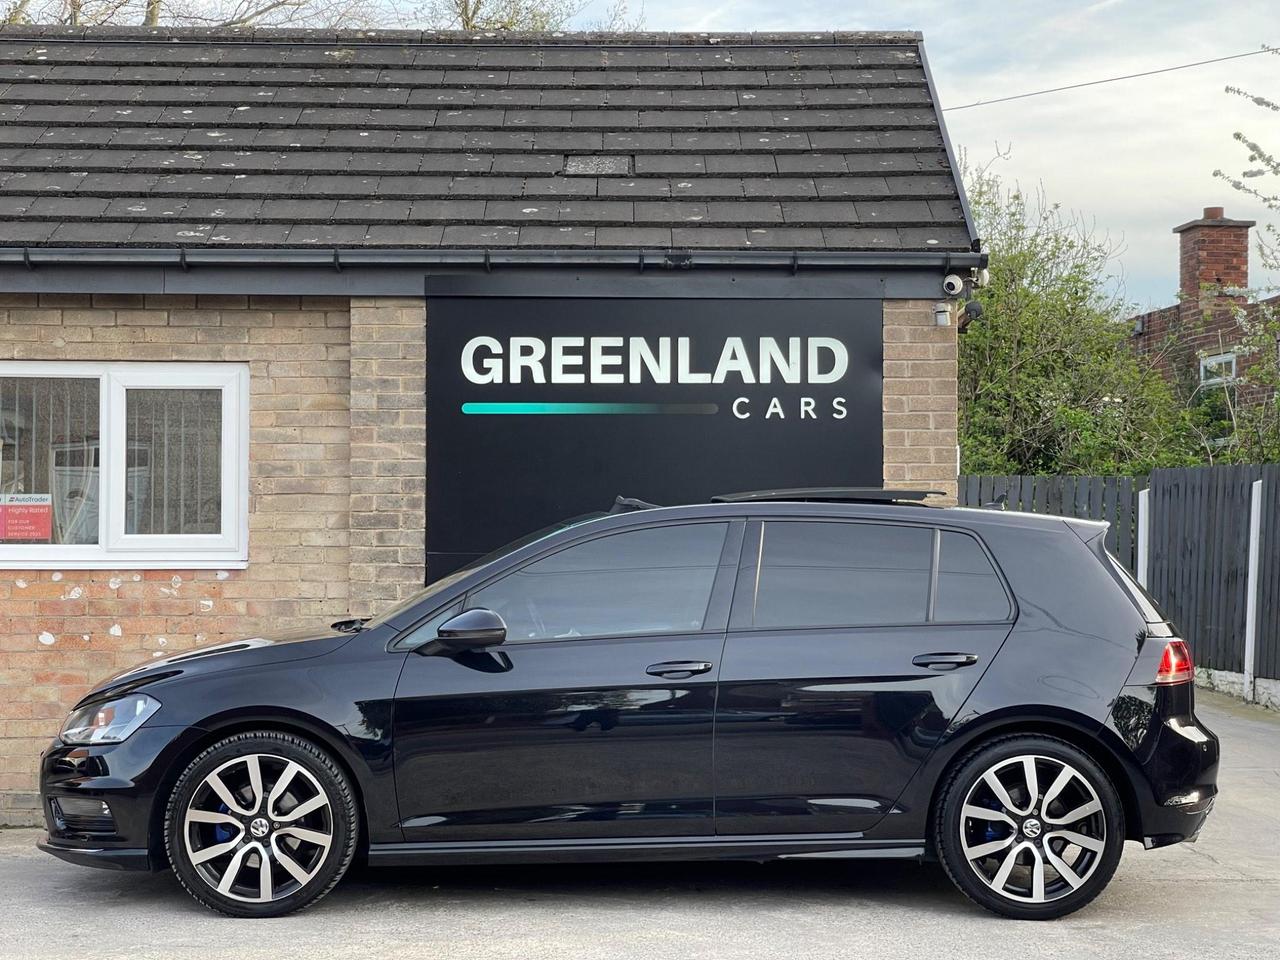 Used 2016 Volkswagen Golf for sale in Sheffield